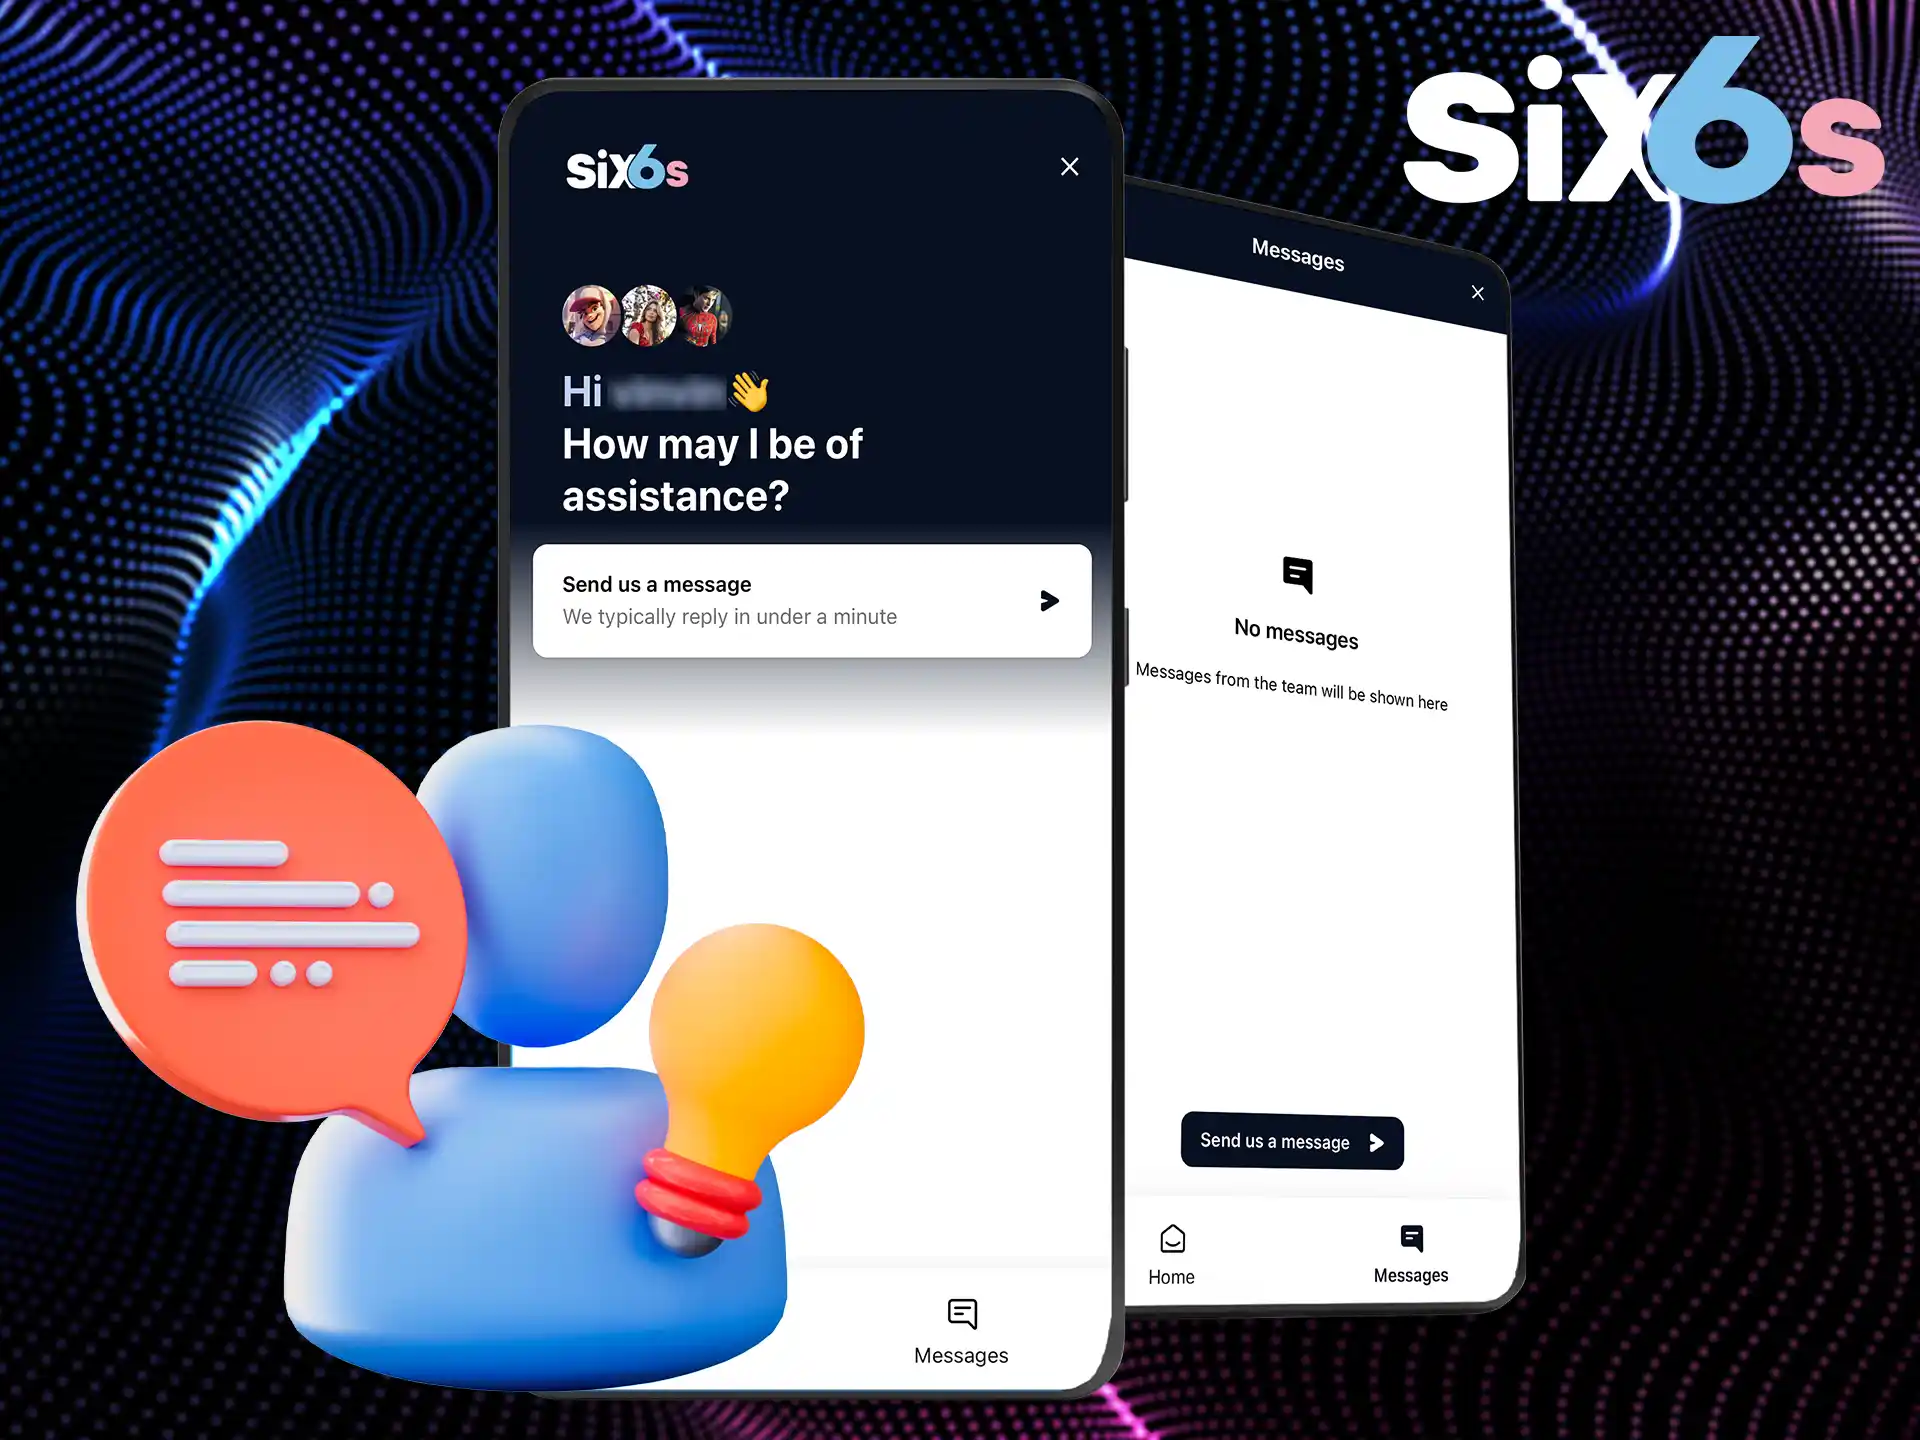 Contact Six6s support team via live chat.